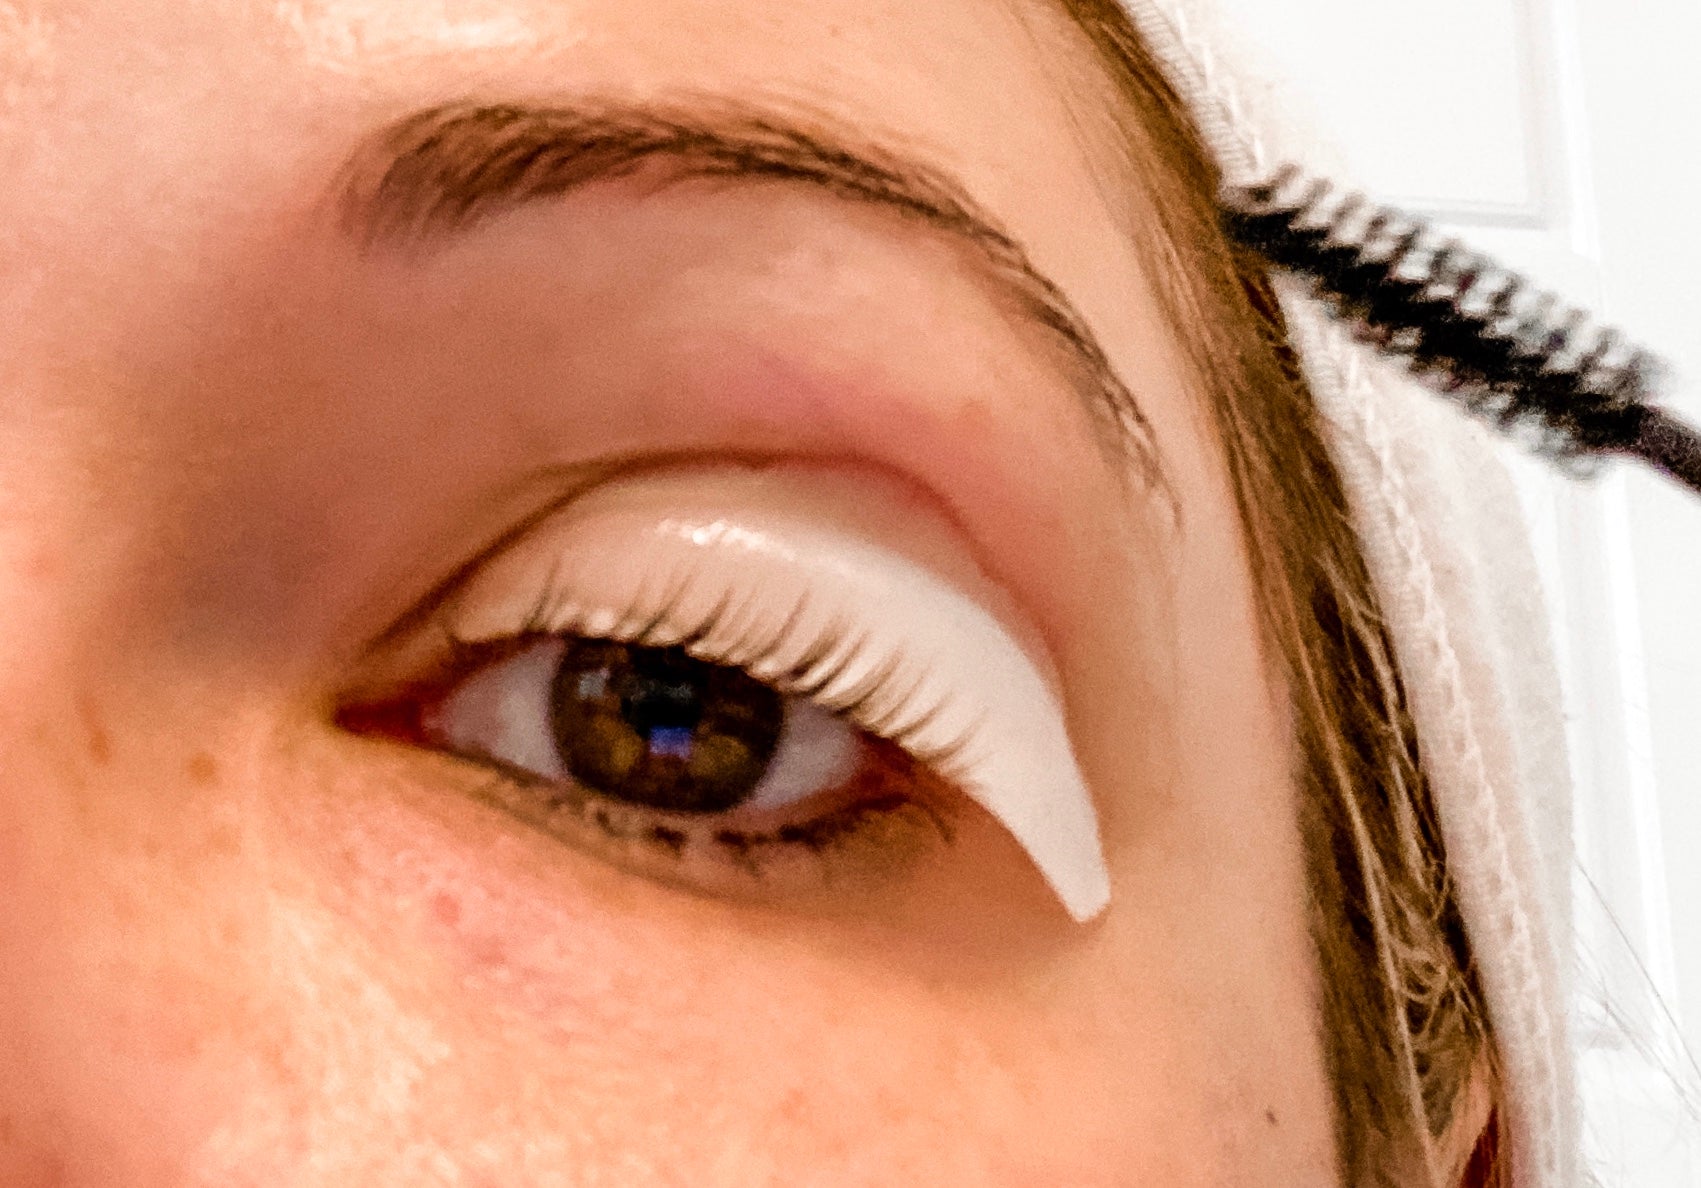 Here's How to Choose Lash Lift Pad Size for Every Client